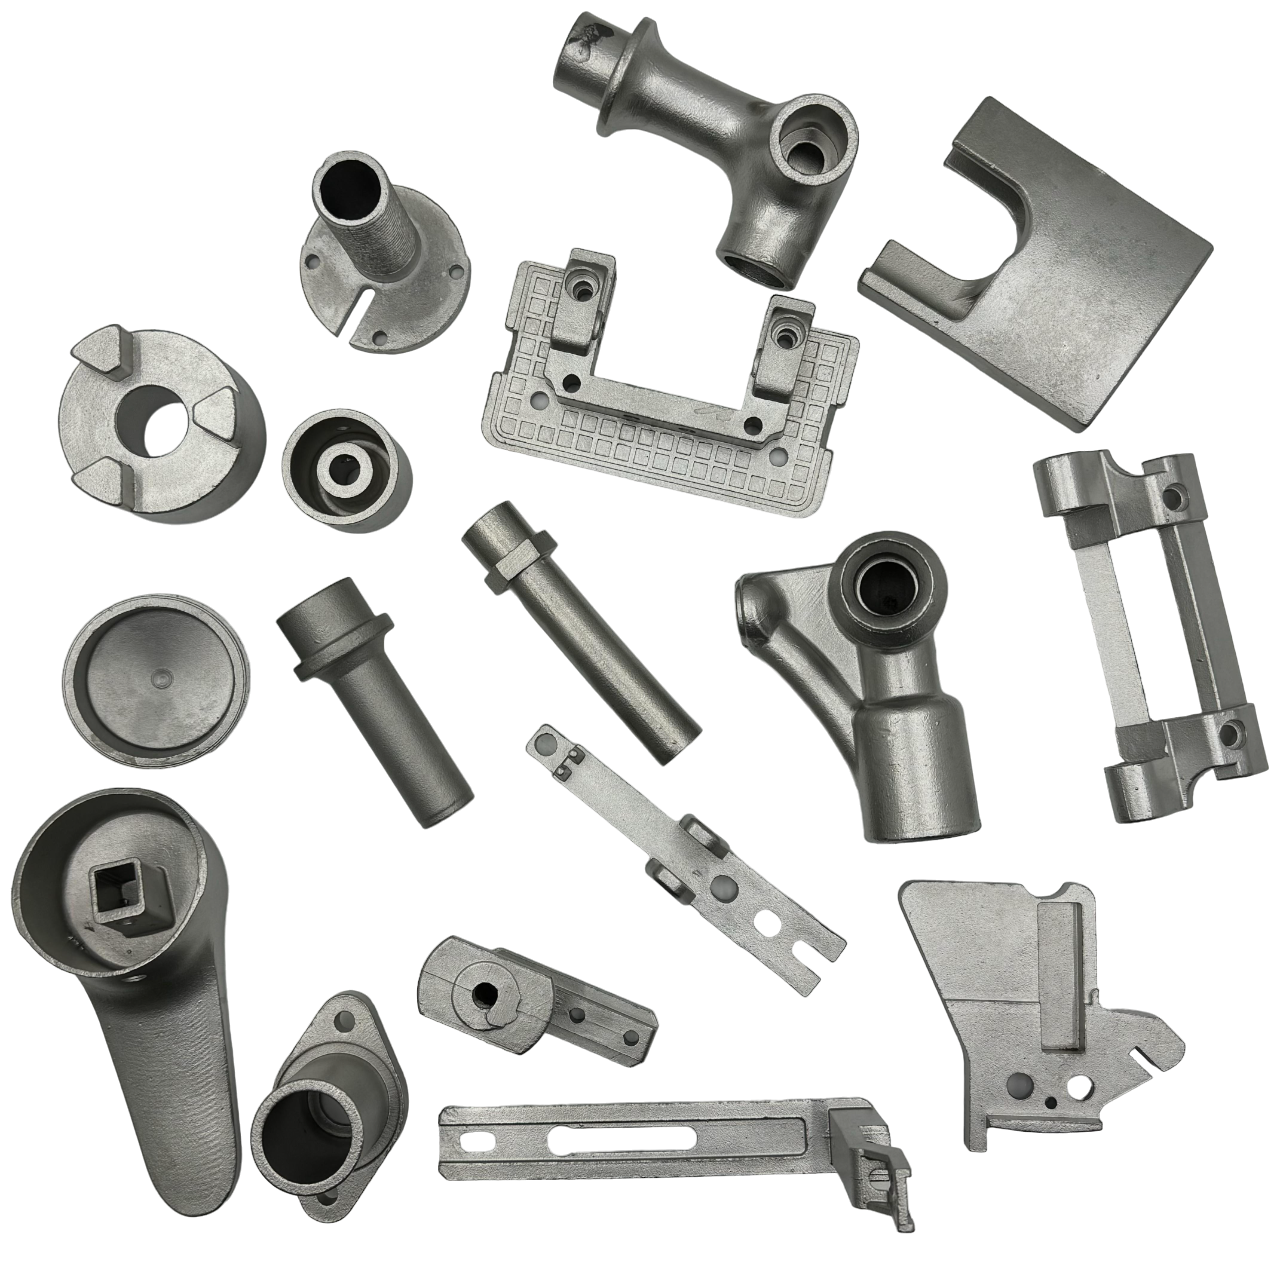 High Precision Stainless Steel Duplex Alloy Steel Investment Casting Parts